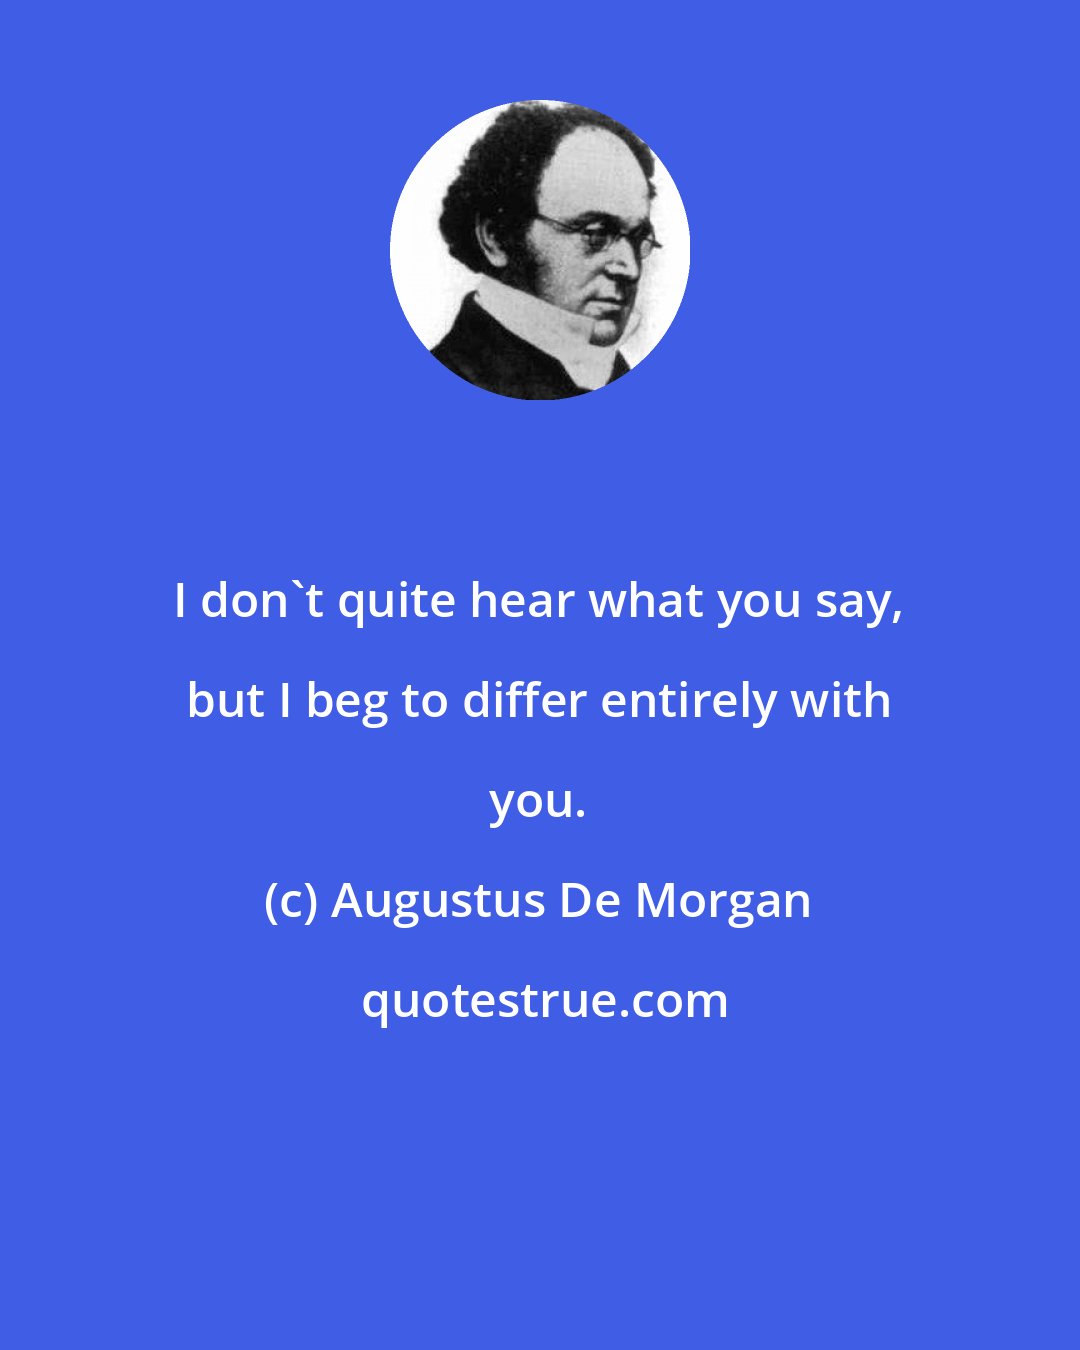 Augustus De Morgan: I don't quite hear what you say, but I beg to differ entirely with you.